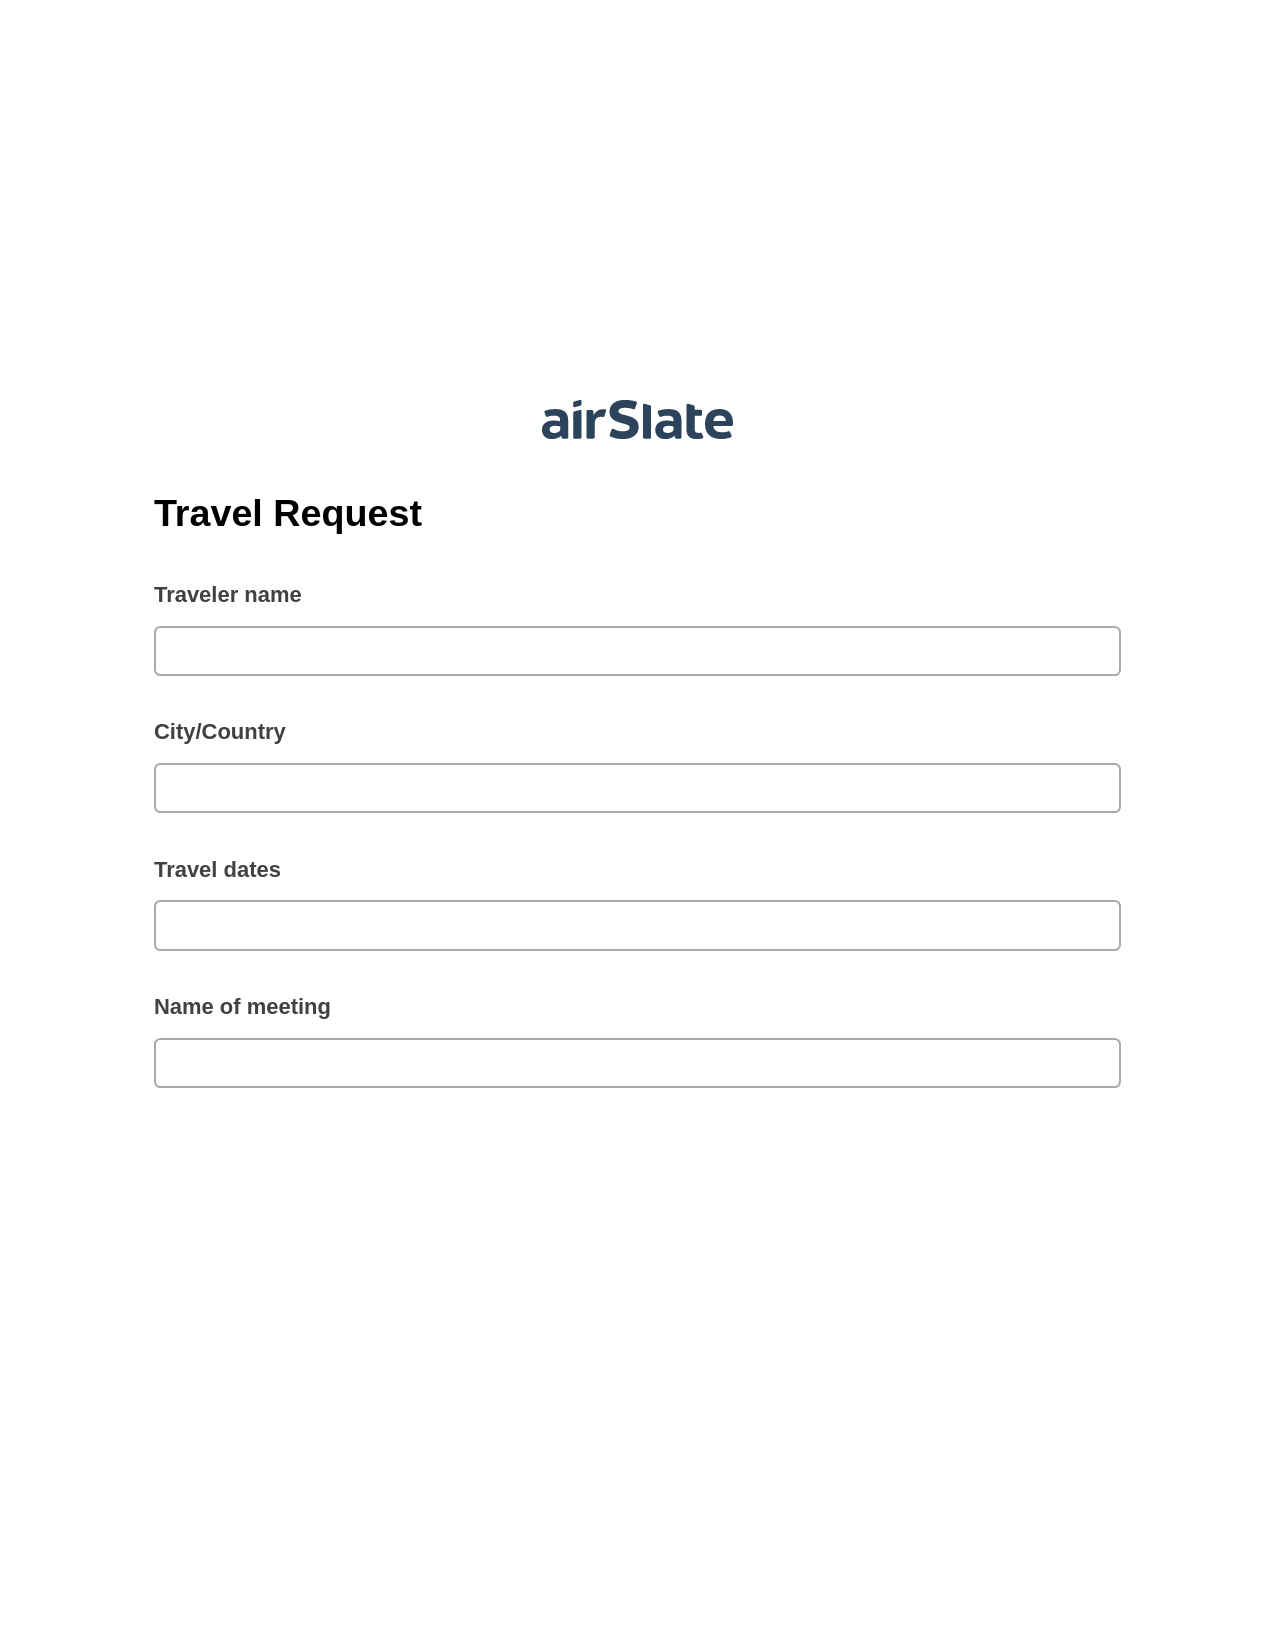 Multirole Travel Request Pre-fill from Salesforce Records with SOQL Bot, Create slate addon, Export to Smartsheet